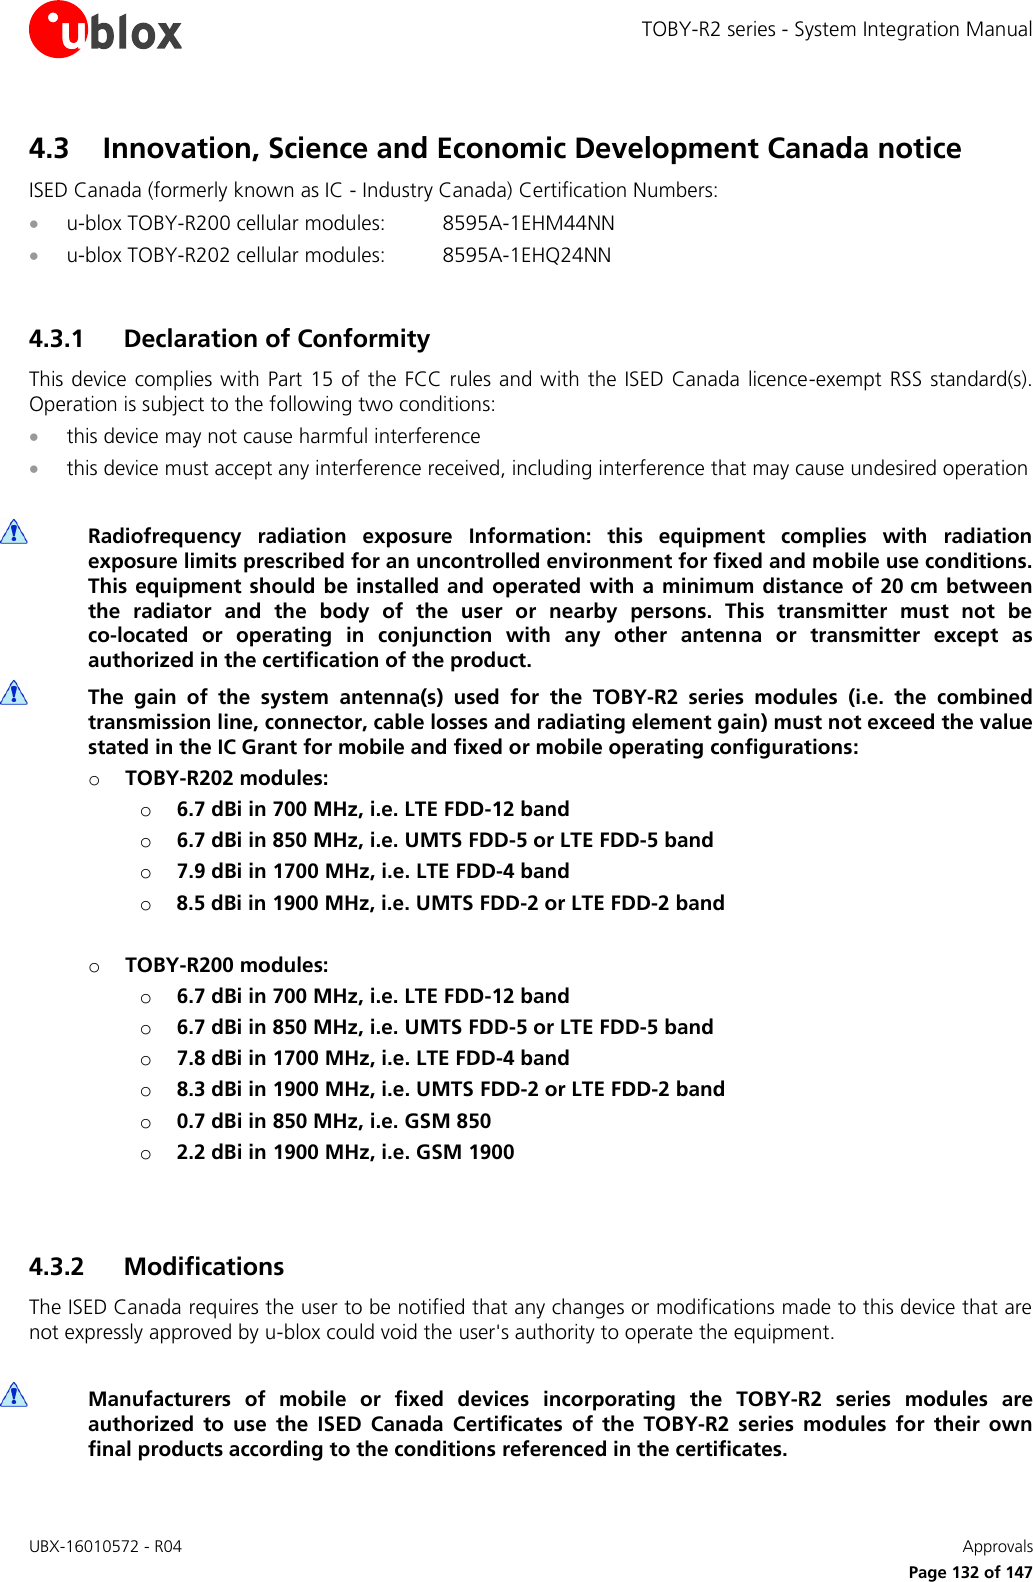 TOBY-R2 series - System Integration Manual UBX-16010572 - R04    Approvals     Page 132 of 147 4.3 Innovation, Science and Economic Development Canada notice ISED Canada (formerly known as IC - Industry Canada) Certification Numbers:  u-blox TOBY-R200 cellular modules:  8595A-1EHM44NN  u-blox TOBY-R202 cellular modules:  8595A-1EHQ24NN  4.3.1 Declaration of Conformity This device complies with  Part  15  of  the  FCC  rules and with the ISED Canada licence-exempt RSS standard(s). Operation is subject to the following two conditions:  this device may not cause harmful interference  this device must accept any interference received, including interference that may cause undesired operation   Radiofrequency  radiation  exposure  Information:  this  equipment  complies  with  radiation exposure limits prescribed for an uncontrolled environment for fixed and mobile use conditions. This equipment  should be installed  and operated  with  a  minimum distance of 20 cm between the  radiator  and  the  body  of  the  user  or  nearby  persons.  This  transmitter  must  not  be co-located  or  operating  in  conjunction  with  any  other  antenna  or  transmitter  except  as authorized in the certification of the product.  The  gain  of  the  system  antenna(s)  used  for  the  TOBY-R2  series  modules  (i.e.  the  combined transmission line, connector, cable losses and radiating element gain) must not exceed the value stated in the IC Grant for mobile and fixed or mobile operating configurations: o TOBY-R202 modules: o 6.7 dBi in 700 MHz, i.e. LTE FDD-12 band o 6.7 dBi in 850 MHz, i.e. UMTS FDD-5 or LTE FDD-5 band  o 7.9 dBi in 1700 MHz, i.e. LTE FDD-4 band o 8.5 dBi in 1900 MHz, i.e. UMTS FDD-2 or LTE FDD-2 band   o TOBY-R200 modules: o 6.7 dBi in 700 MHz, i.e. LTE FDD-12 band o 6.7 dBi in 850 MHz, i.e. UMTS FDD-5 or LTE FDD-5 band  o 7.8 dBi in 1700 MHz, i.e. LTE FDD-4 band o 8.3 dBi in 1900 MHz, i.e. UMTS FDD-2 or LTE FDD-2 band  o 0.7 dBi in 850 MHz, i.e. GSM 850 o 2.2 dBi in 1900 MHz, i.e. GSM 1900   4.3.2 Modifications The ISED Canada requires the user to be notified that any changes or modifications made to this device that are not expressly approved by u-blox could void the user&apos;s authority to operate the equipment.   Manufacturers  of  mobile  or  fixed  devices  incorporating  the  TOBY-R2  series  modules  are authorized  to  use  the  ISED  Canada  Certificates  of  the  TOBY-R2  series  modules  for  their  own final products according to the conditions referenced in the certificates. 